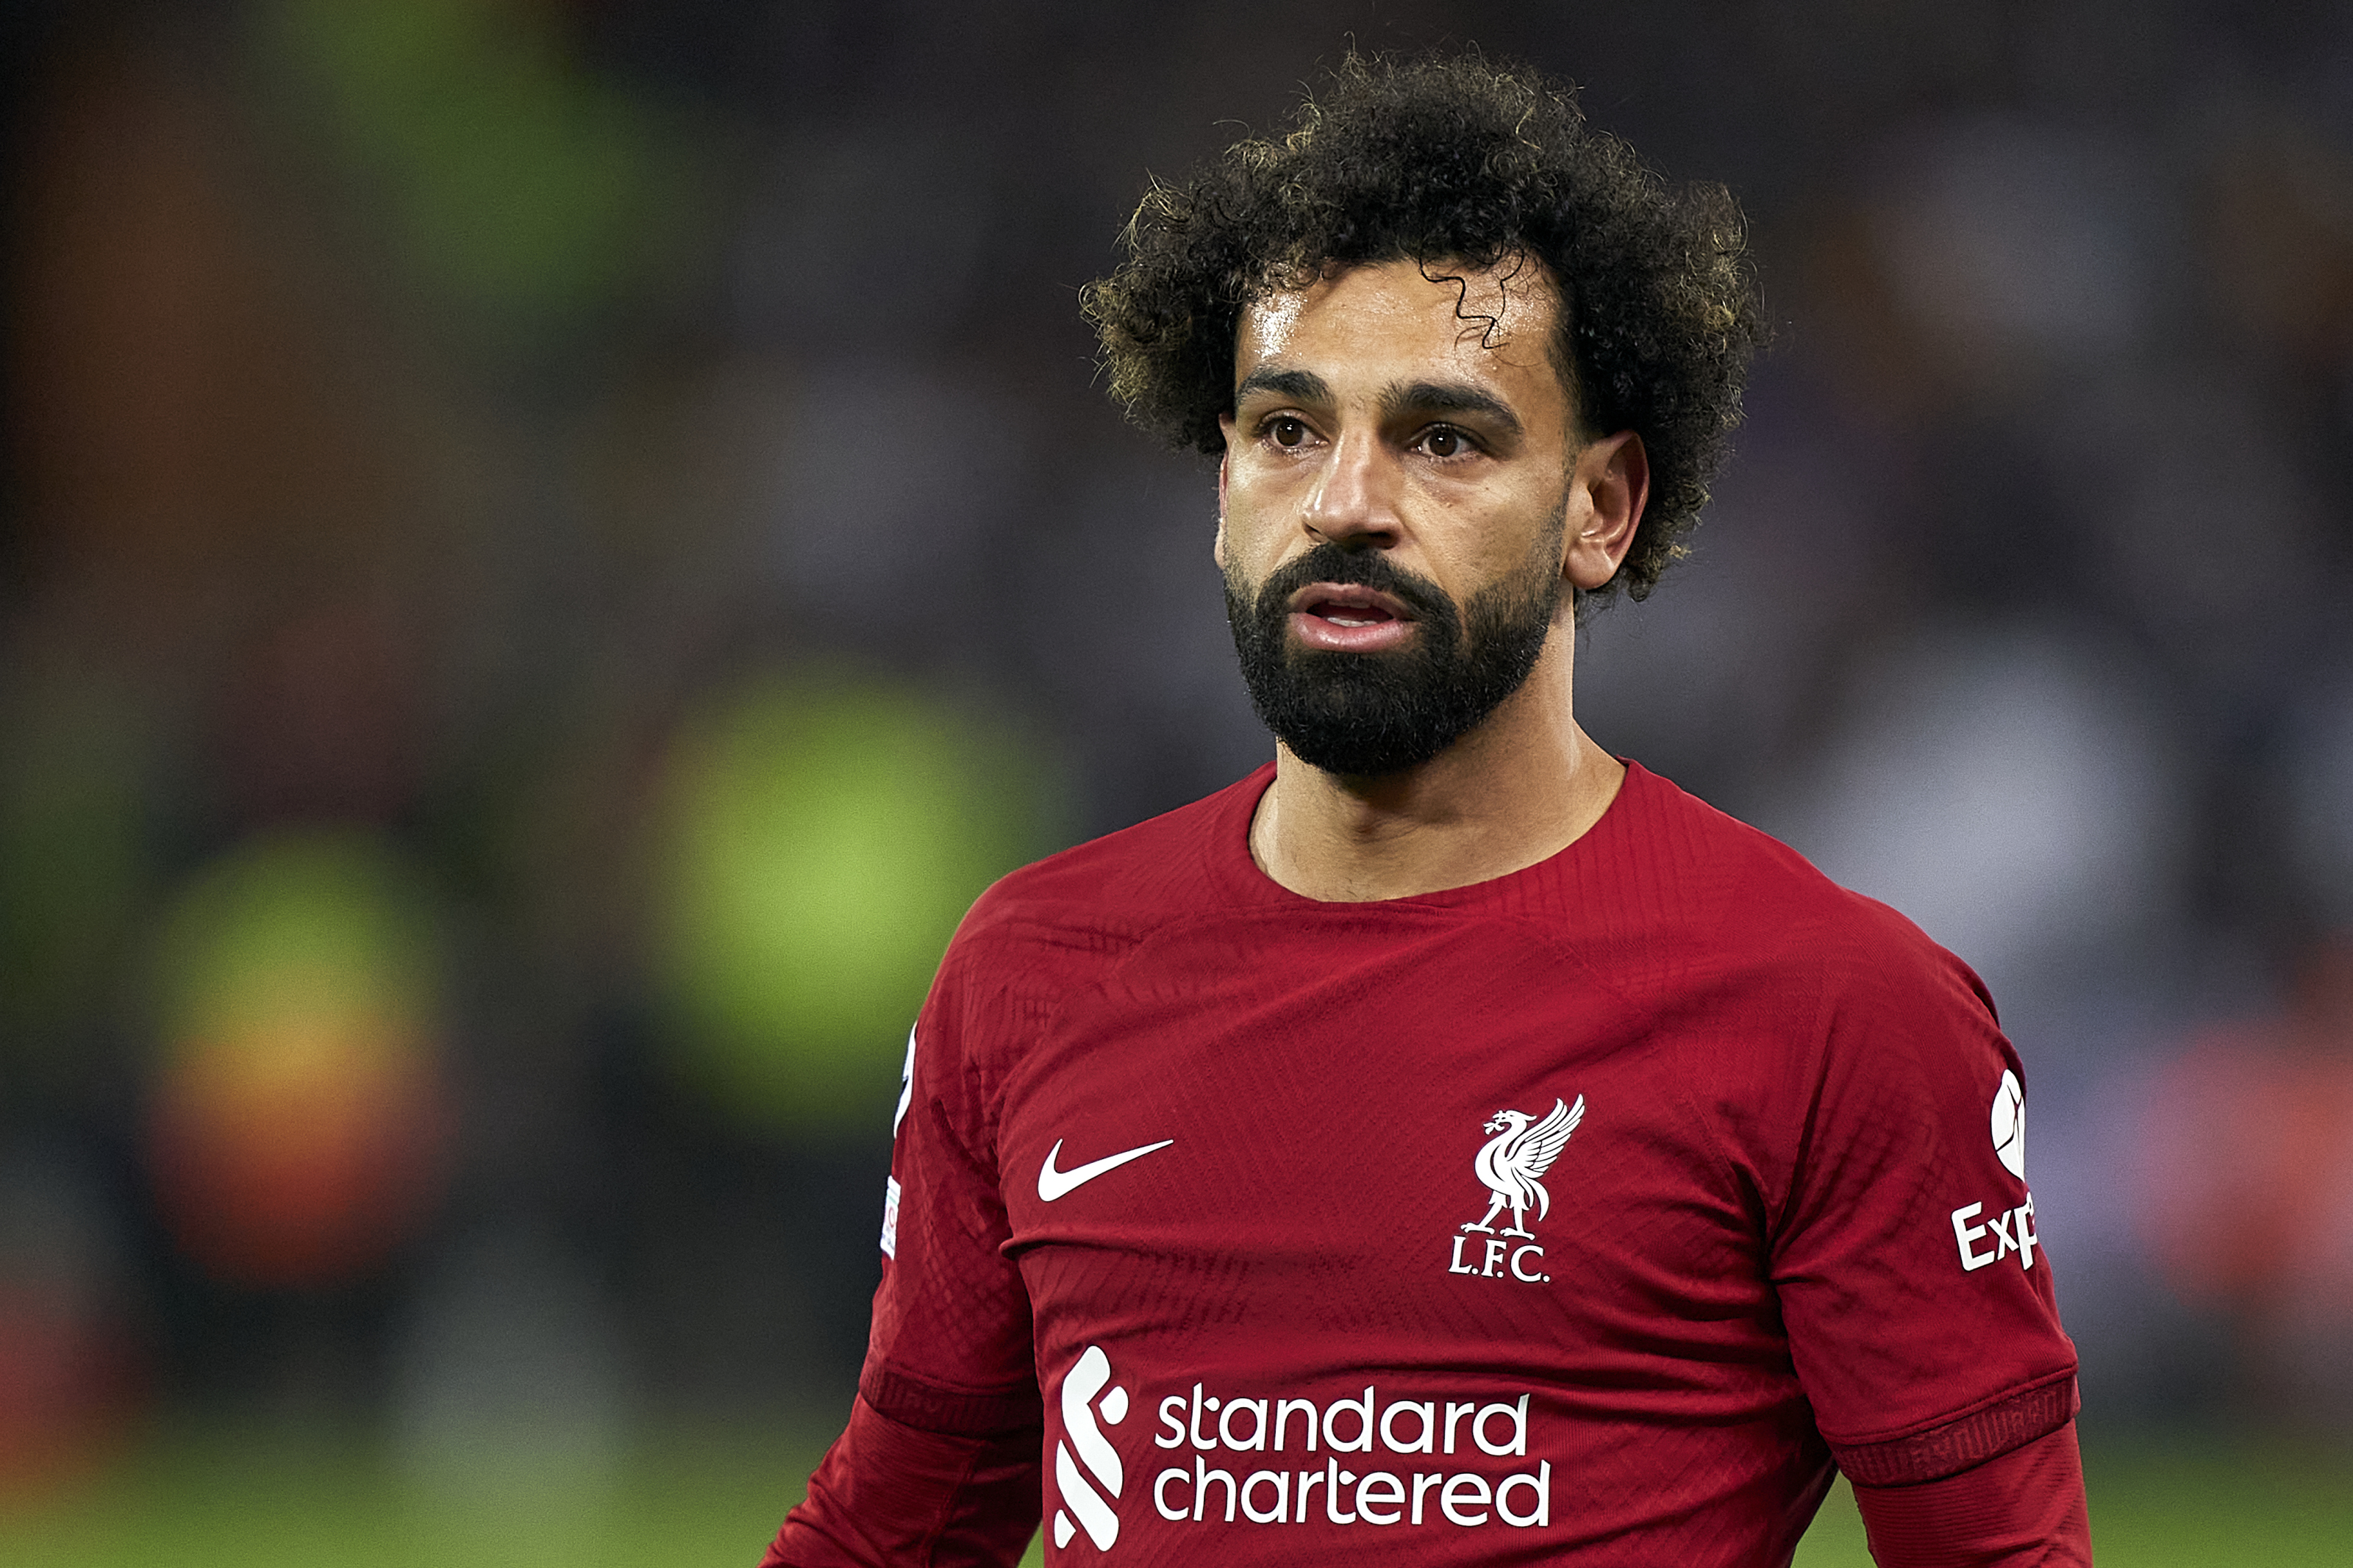 Alan Shearer says Liverpool star Mohamed Salah might leave in January. 